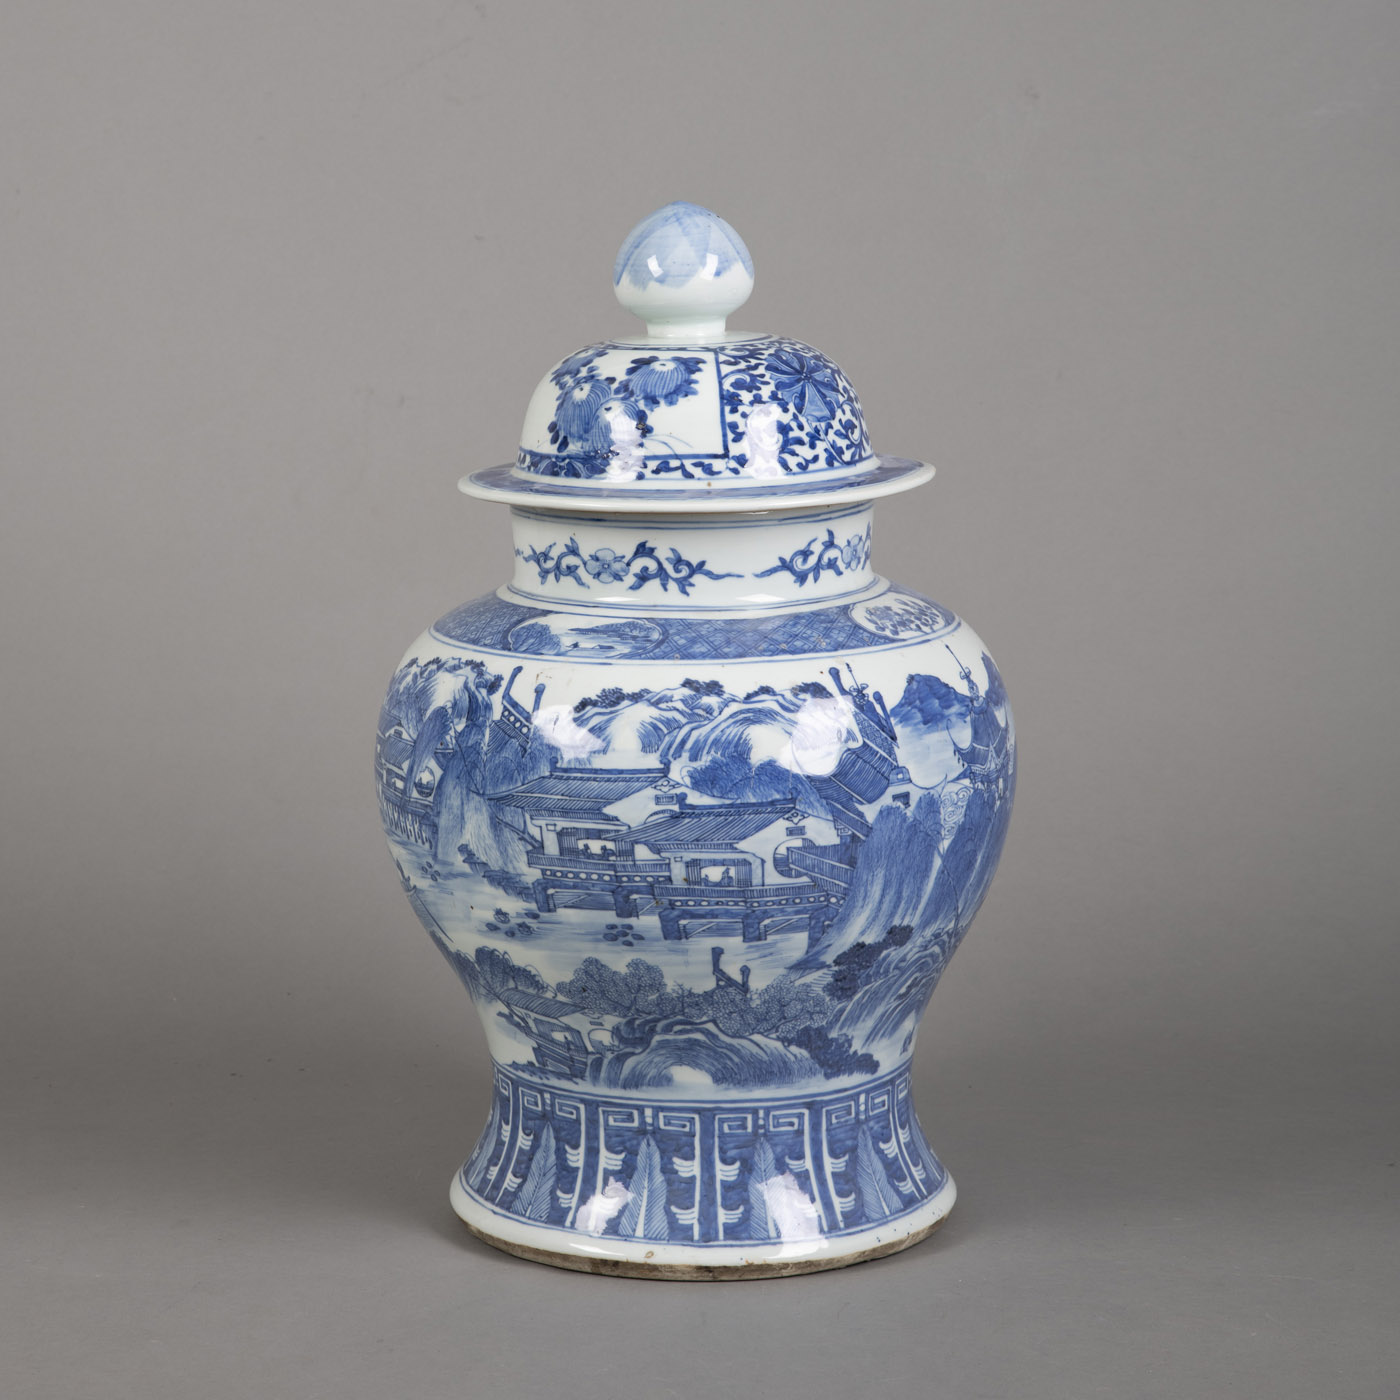 <b>A BLUE AND WHITE PORCELAIN LANDSCAPE VASE AND COVER</b>